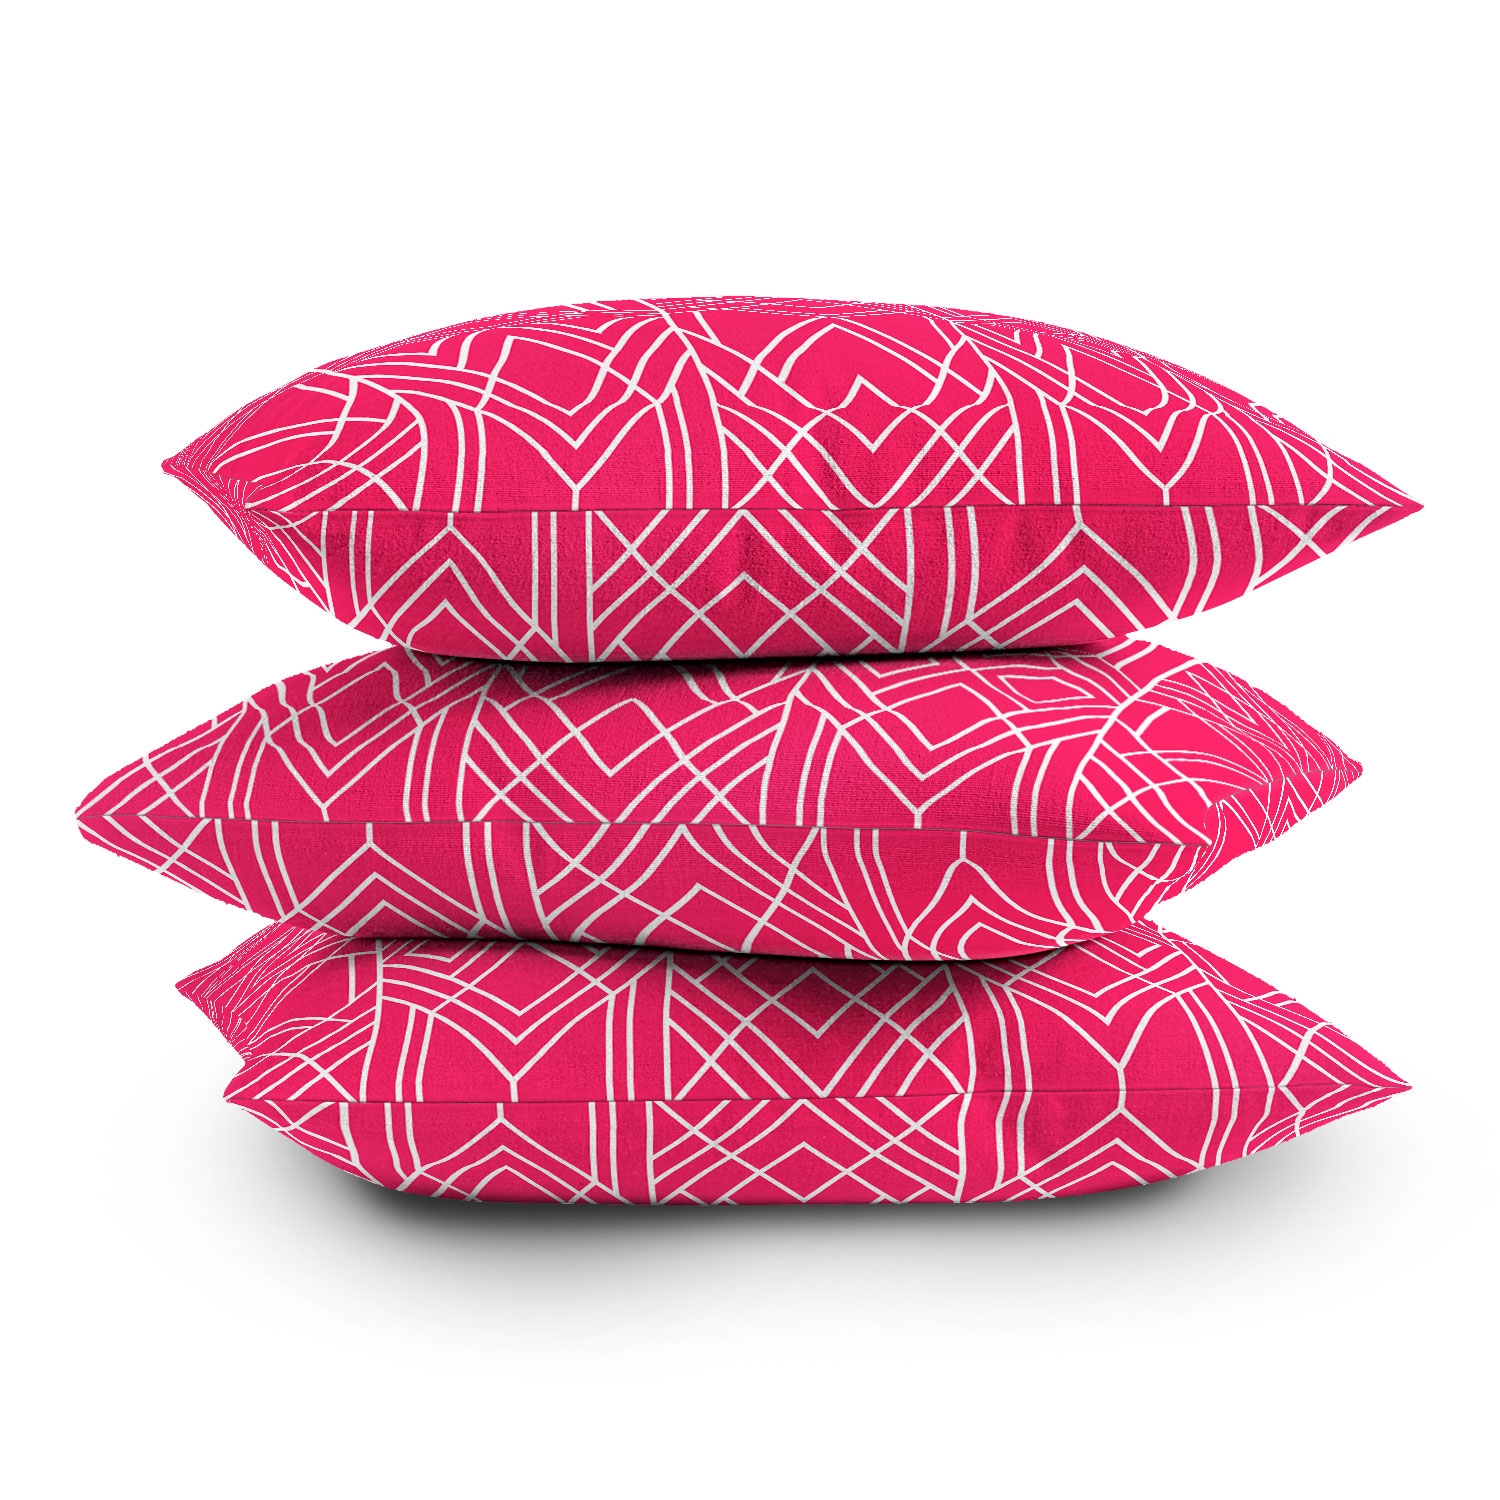 Art Deco Hot Pink by Elisabeth Fredriksson - Outdoor Throw Pillow 18" x 18" - Image 3